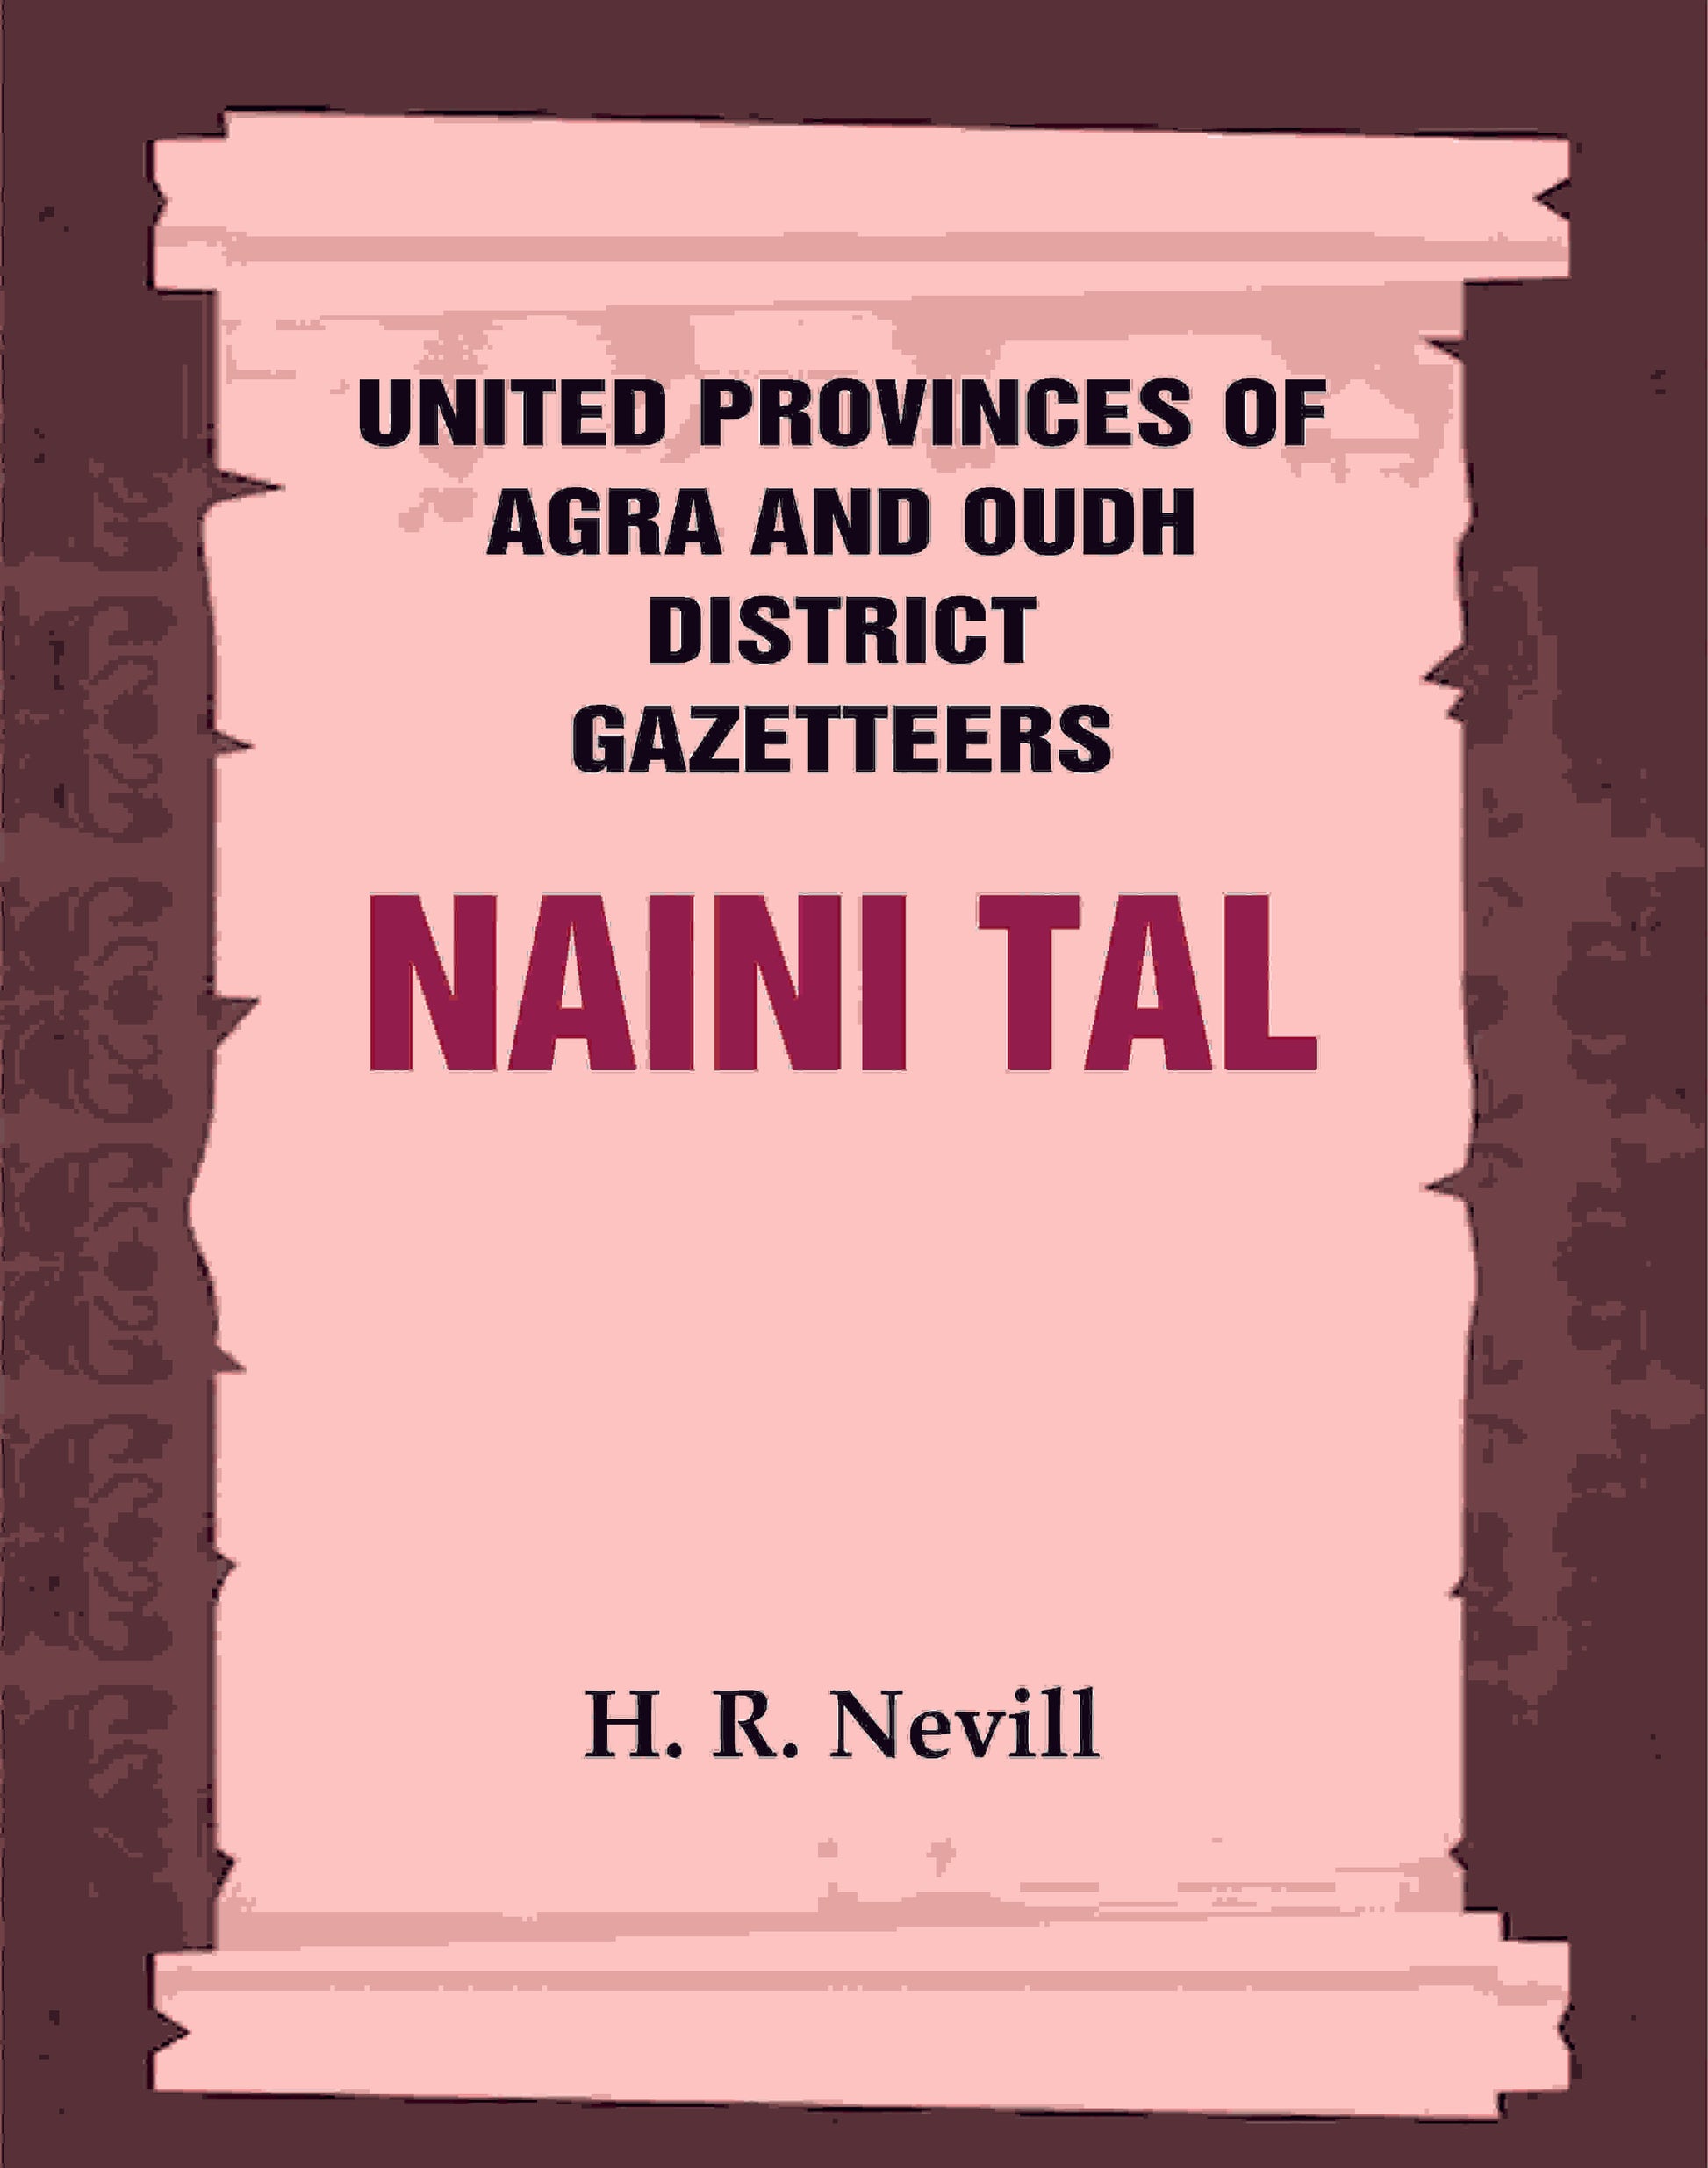 United Provinces of Agra and Oudh District Gazetteers: Naini Tal